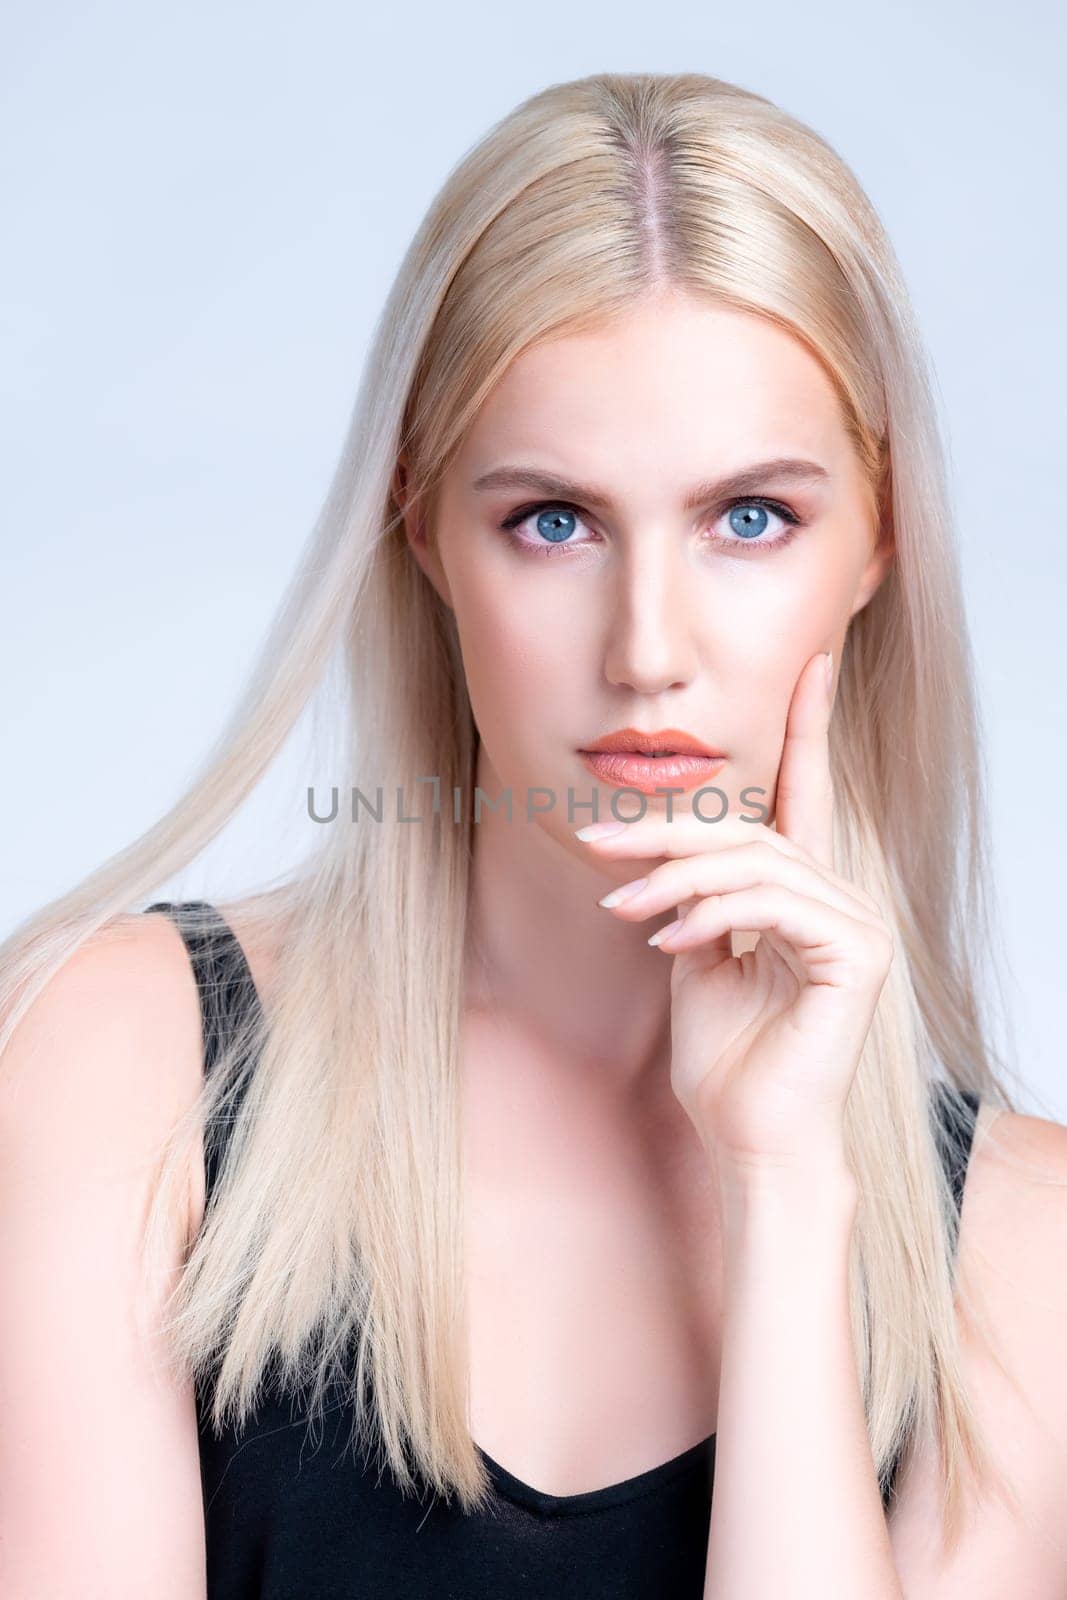 Closeup personable beautiful woman portrait with perfect smooth clean skin and natural makeup portrait in isolated background. Hand gesture with expressive facial expression for beauty model concept.